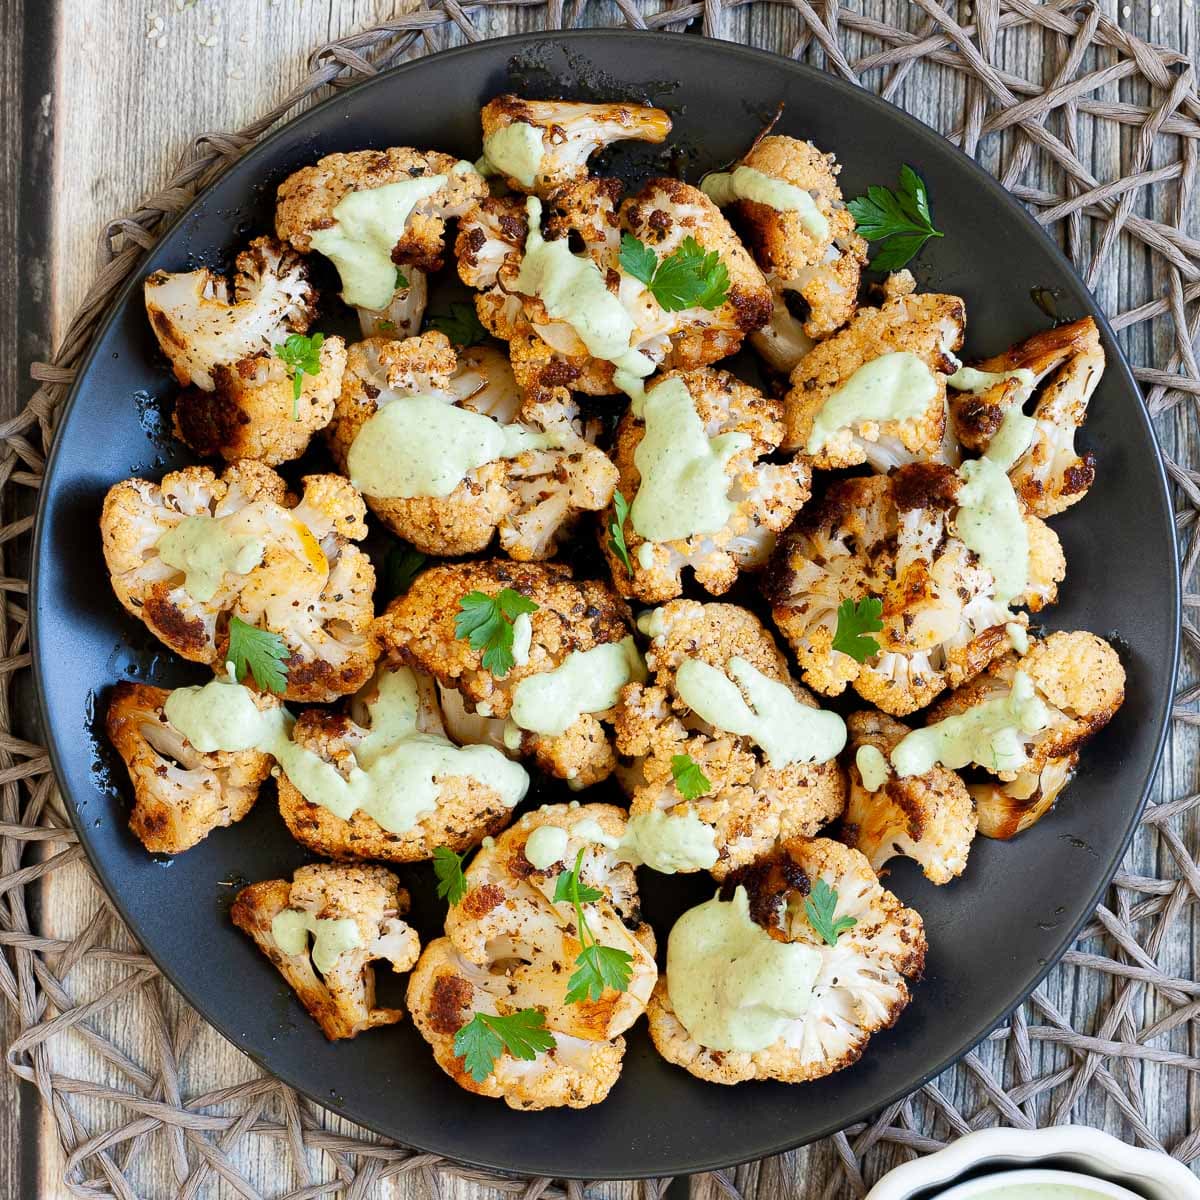 Black plate full of roasted cauliflower florets drizzled with a light green creamy sauce and sprinkled with fresh parsley